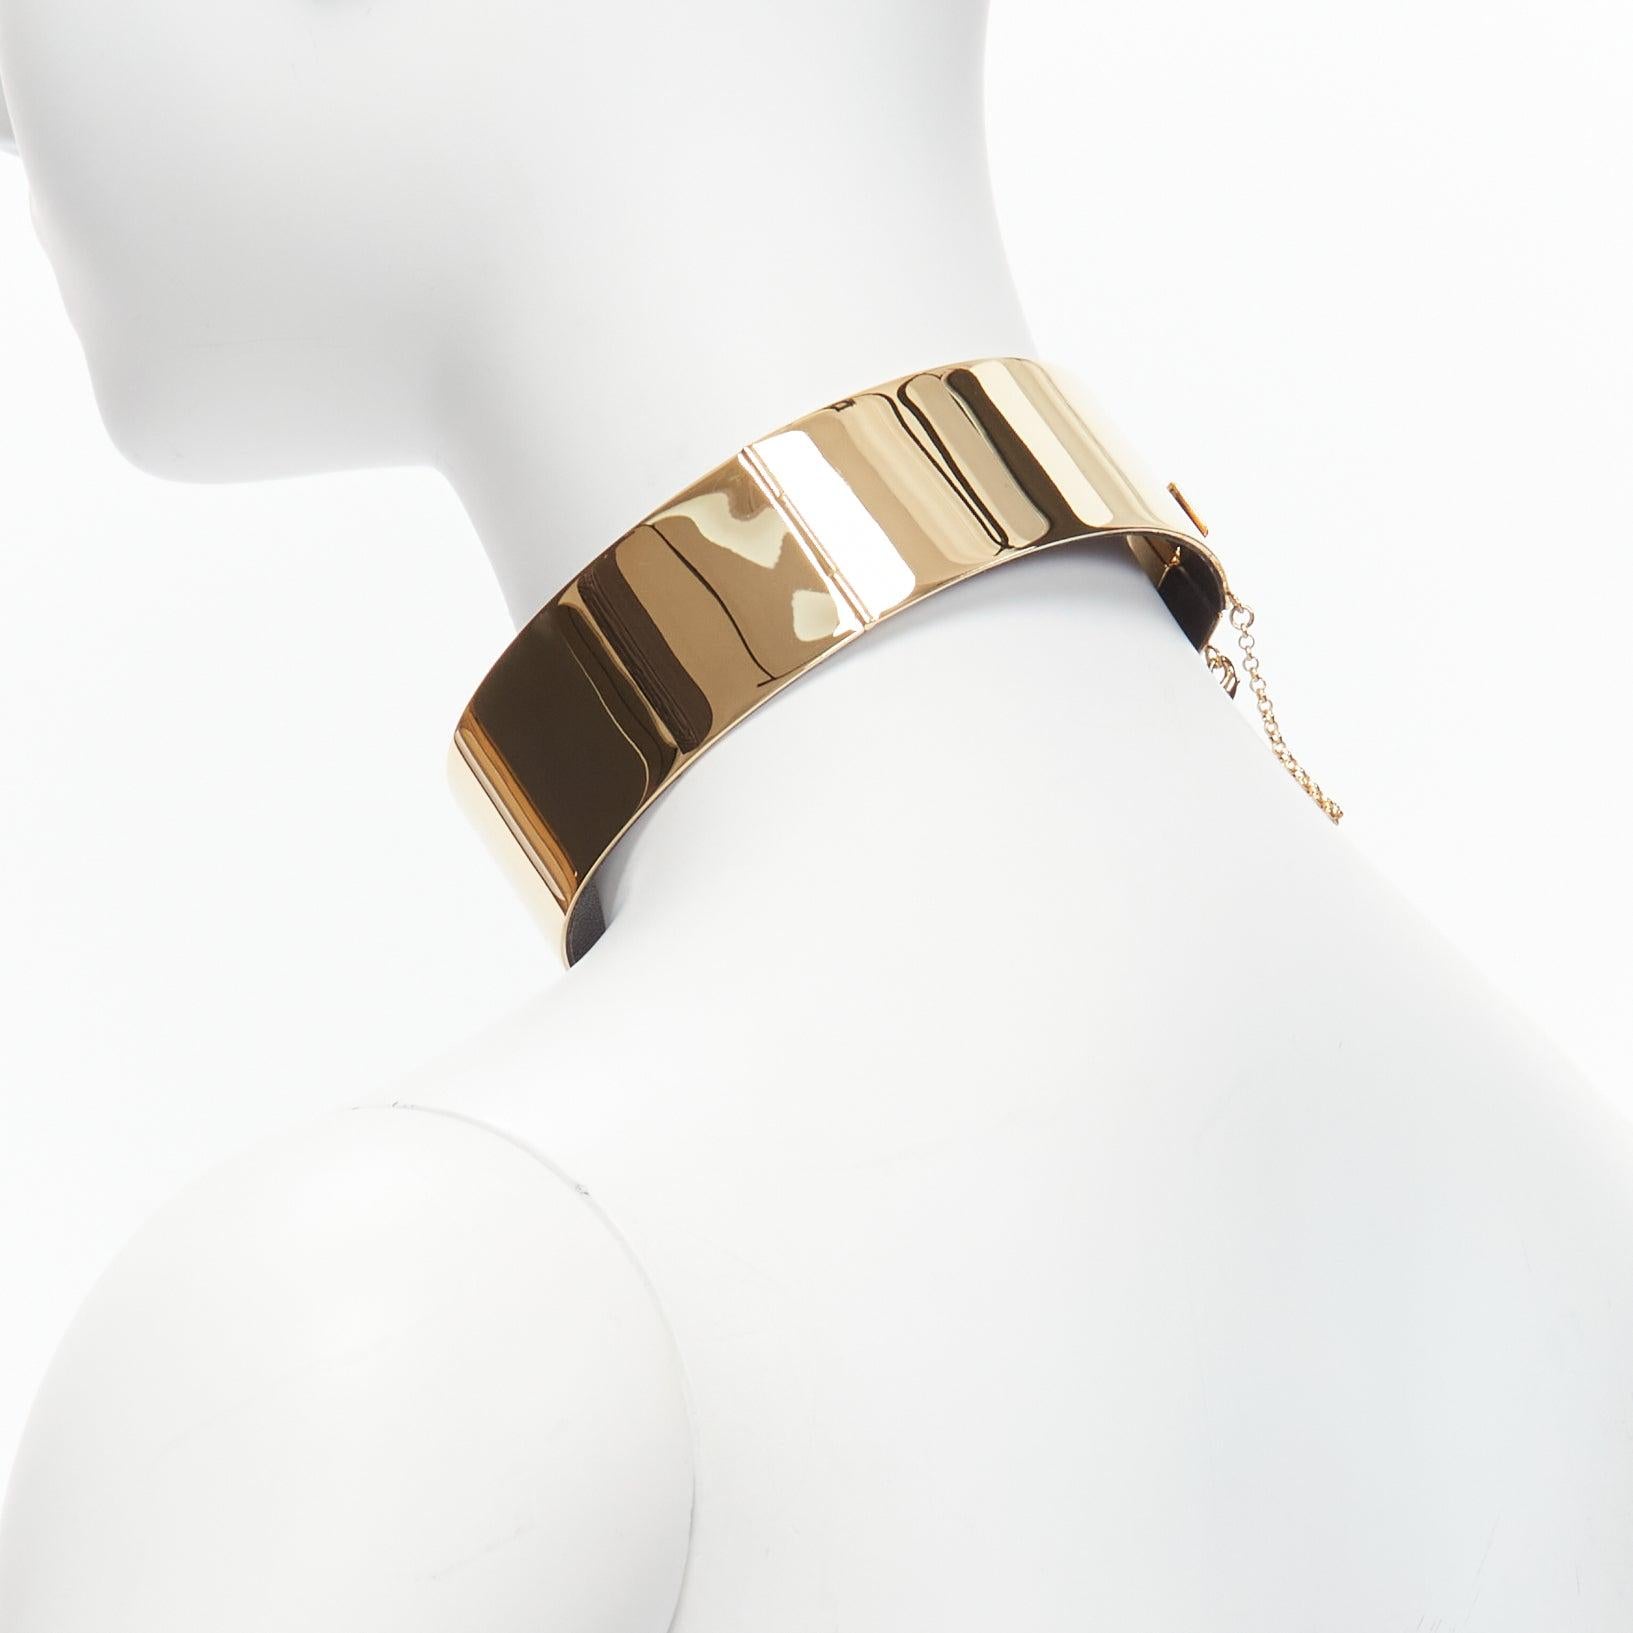 OLD CELINE Phoebe Philo 2011 Runway leather lined metal bar choker necklace For Sale 1